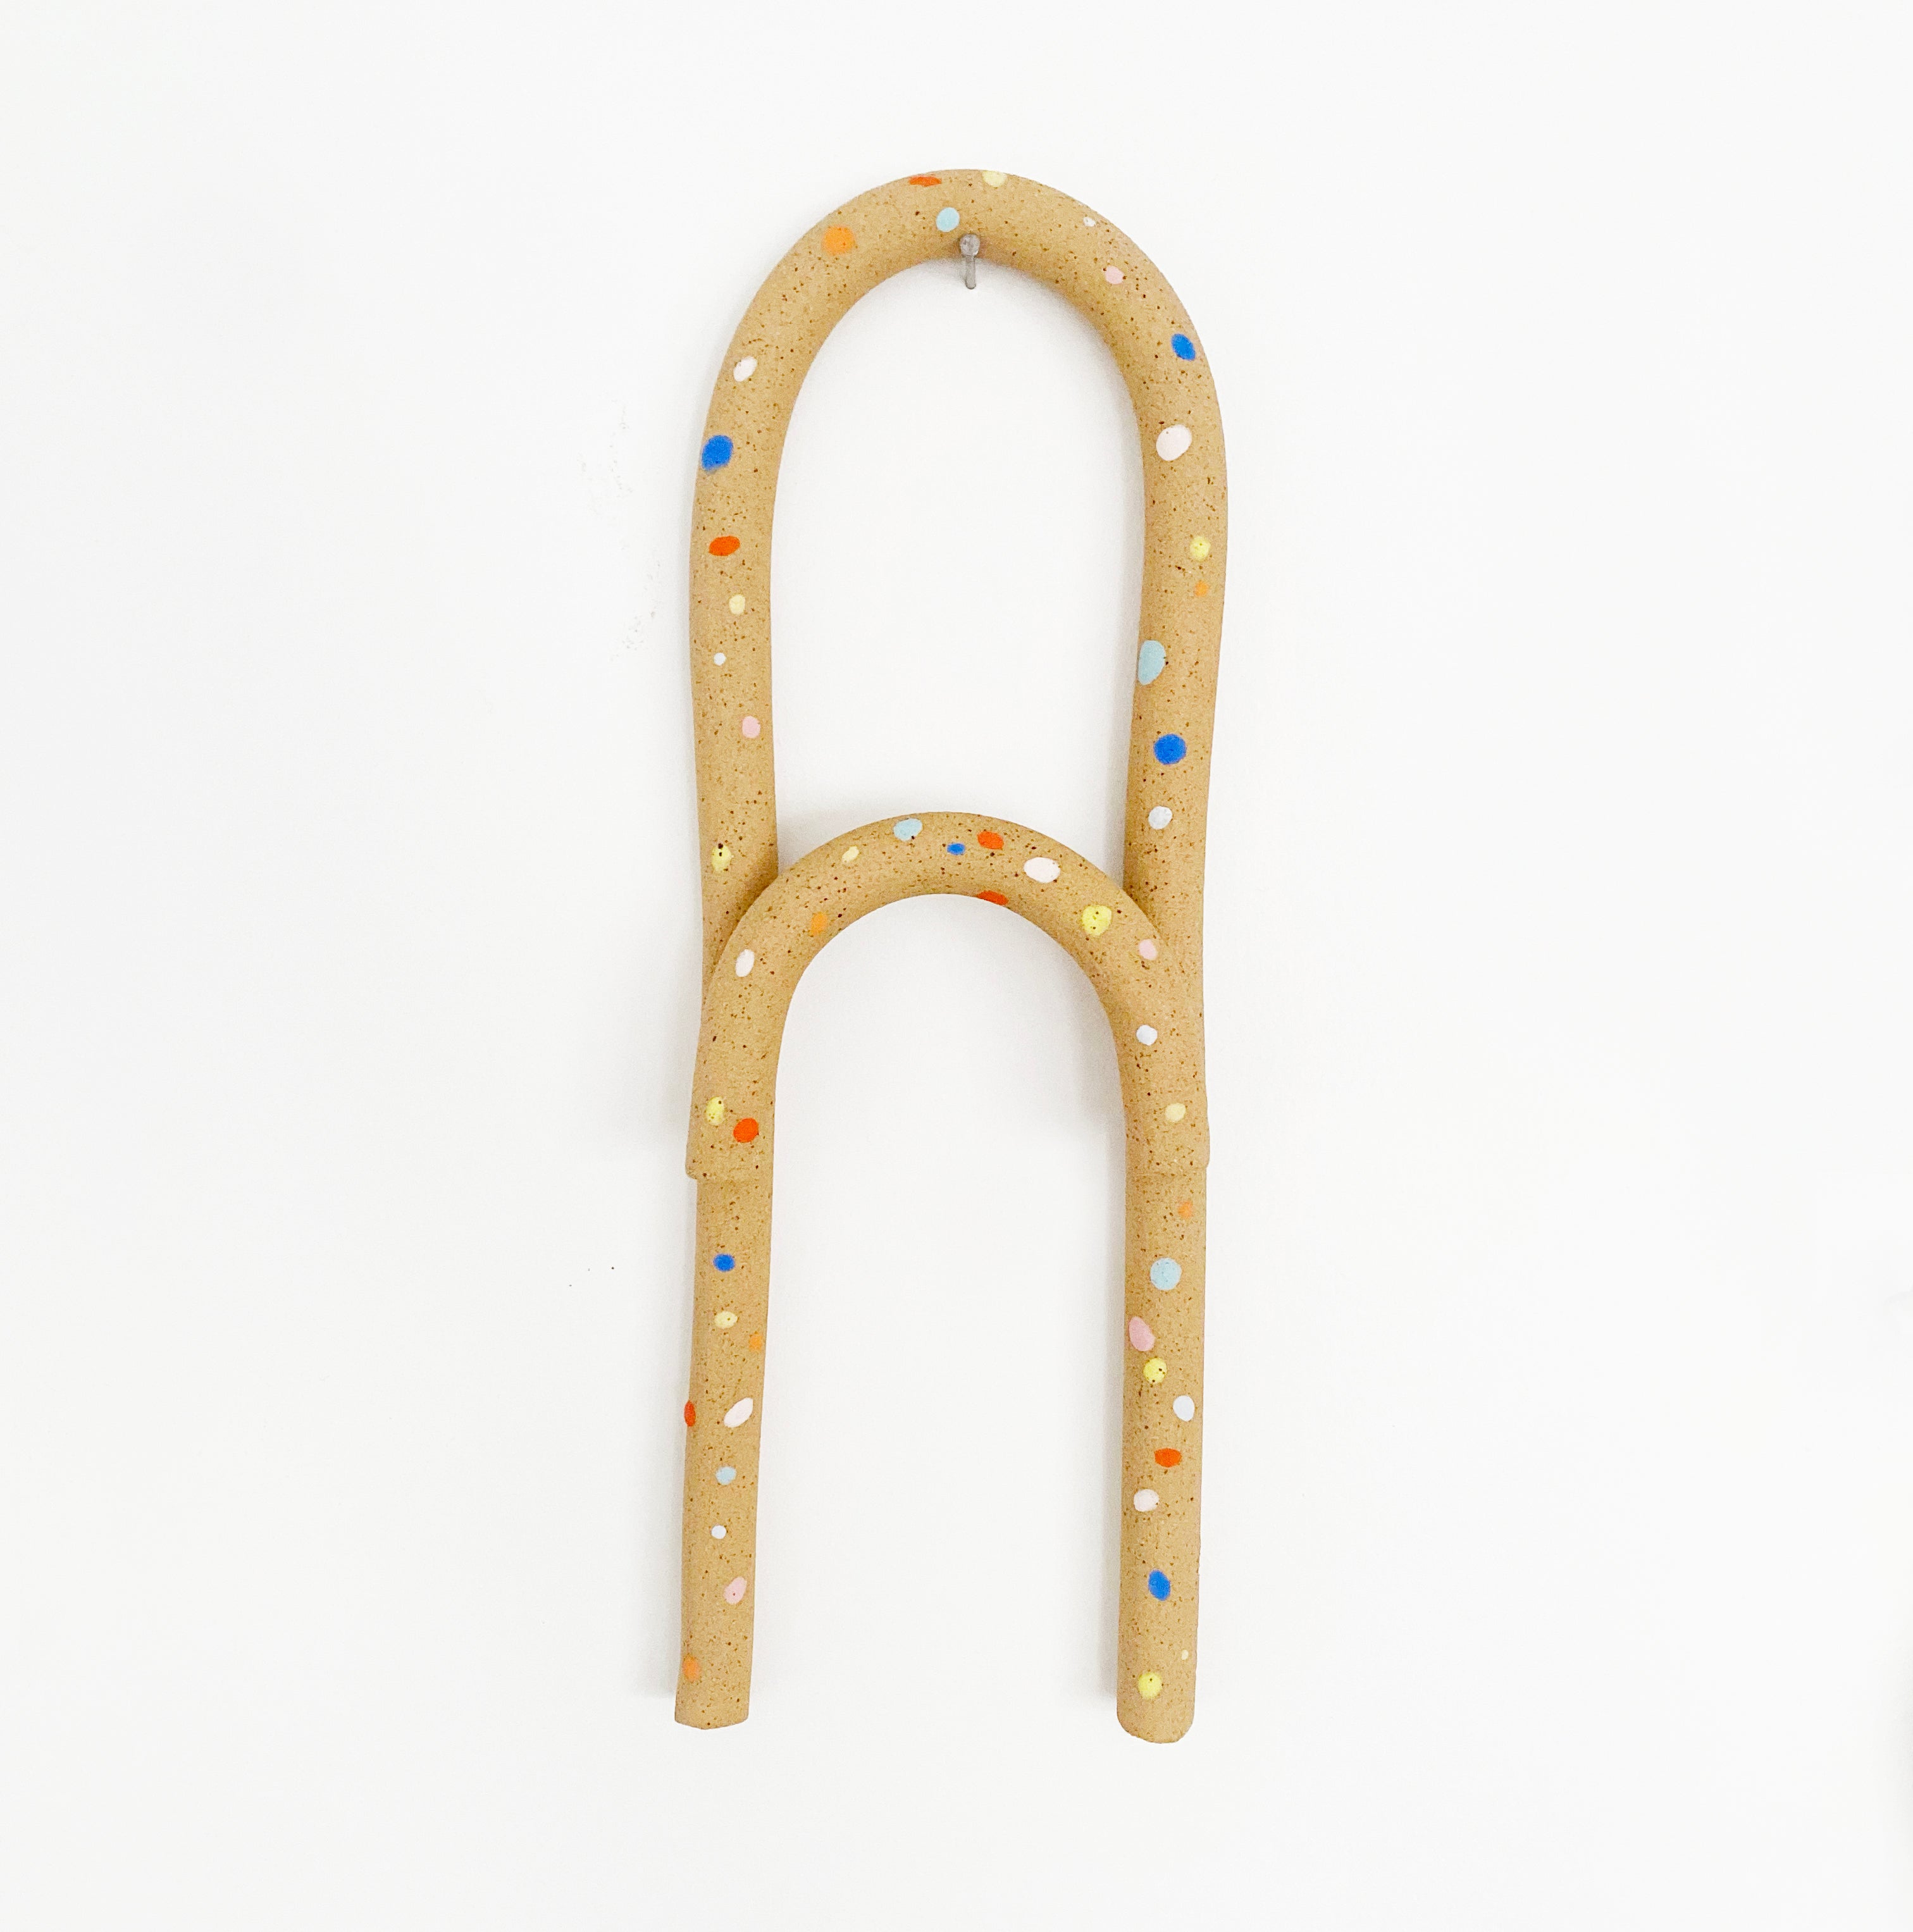 Clay Object 15 - Sprinkles Speckle Arch